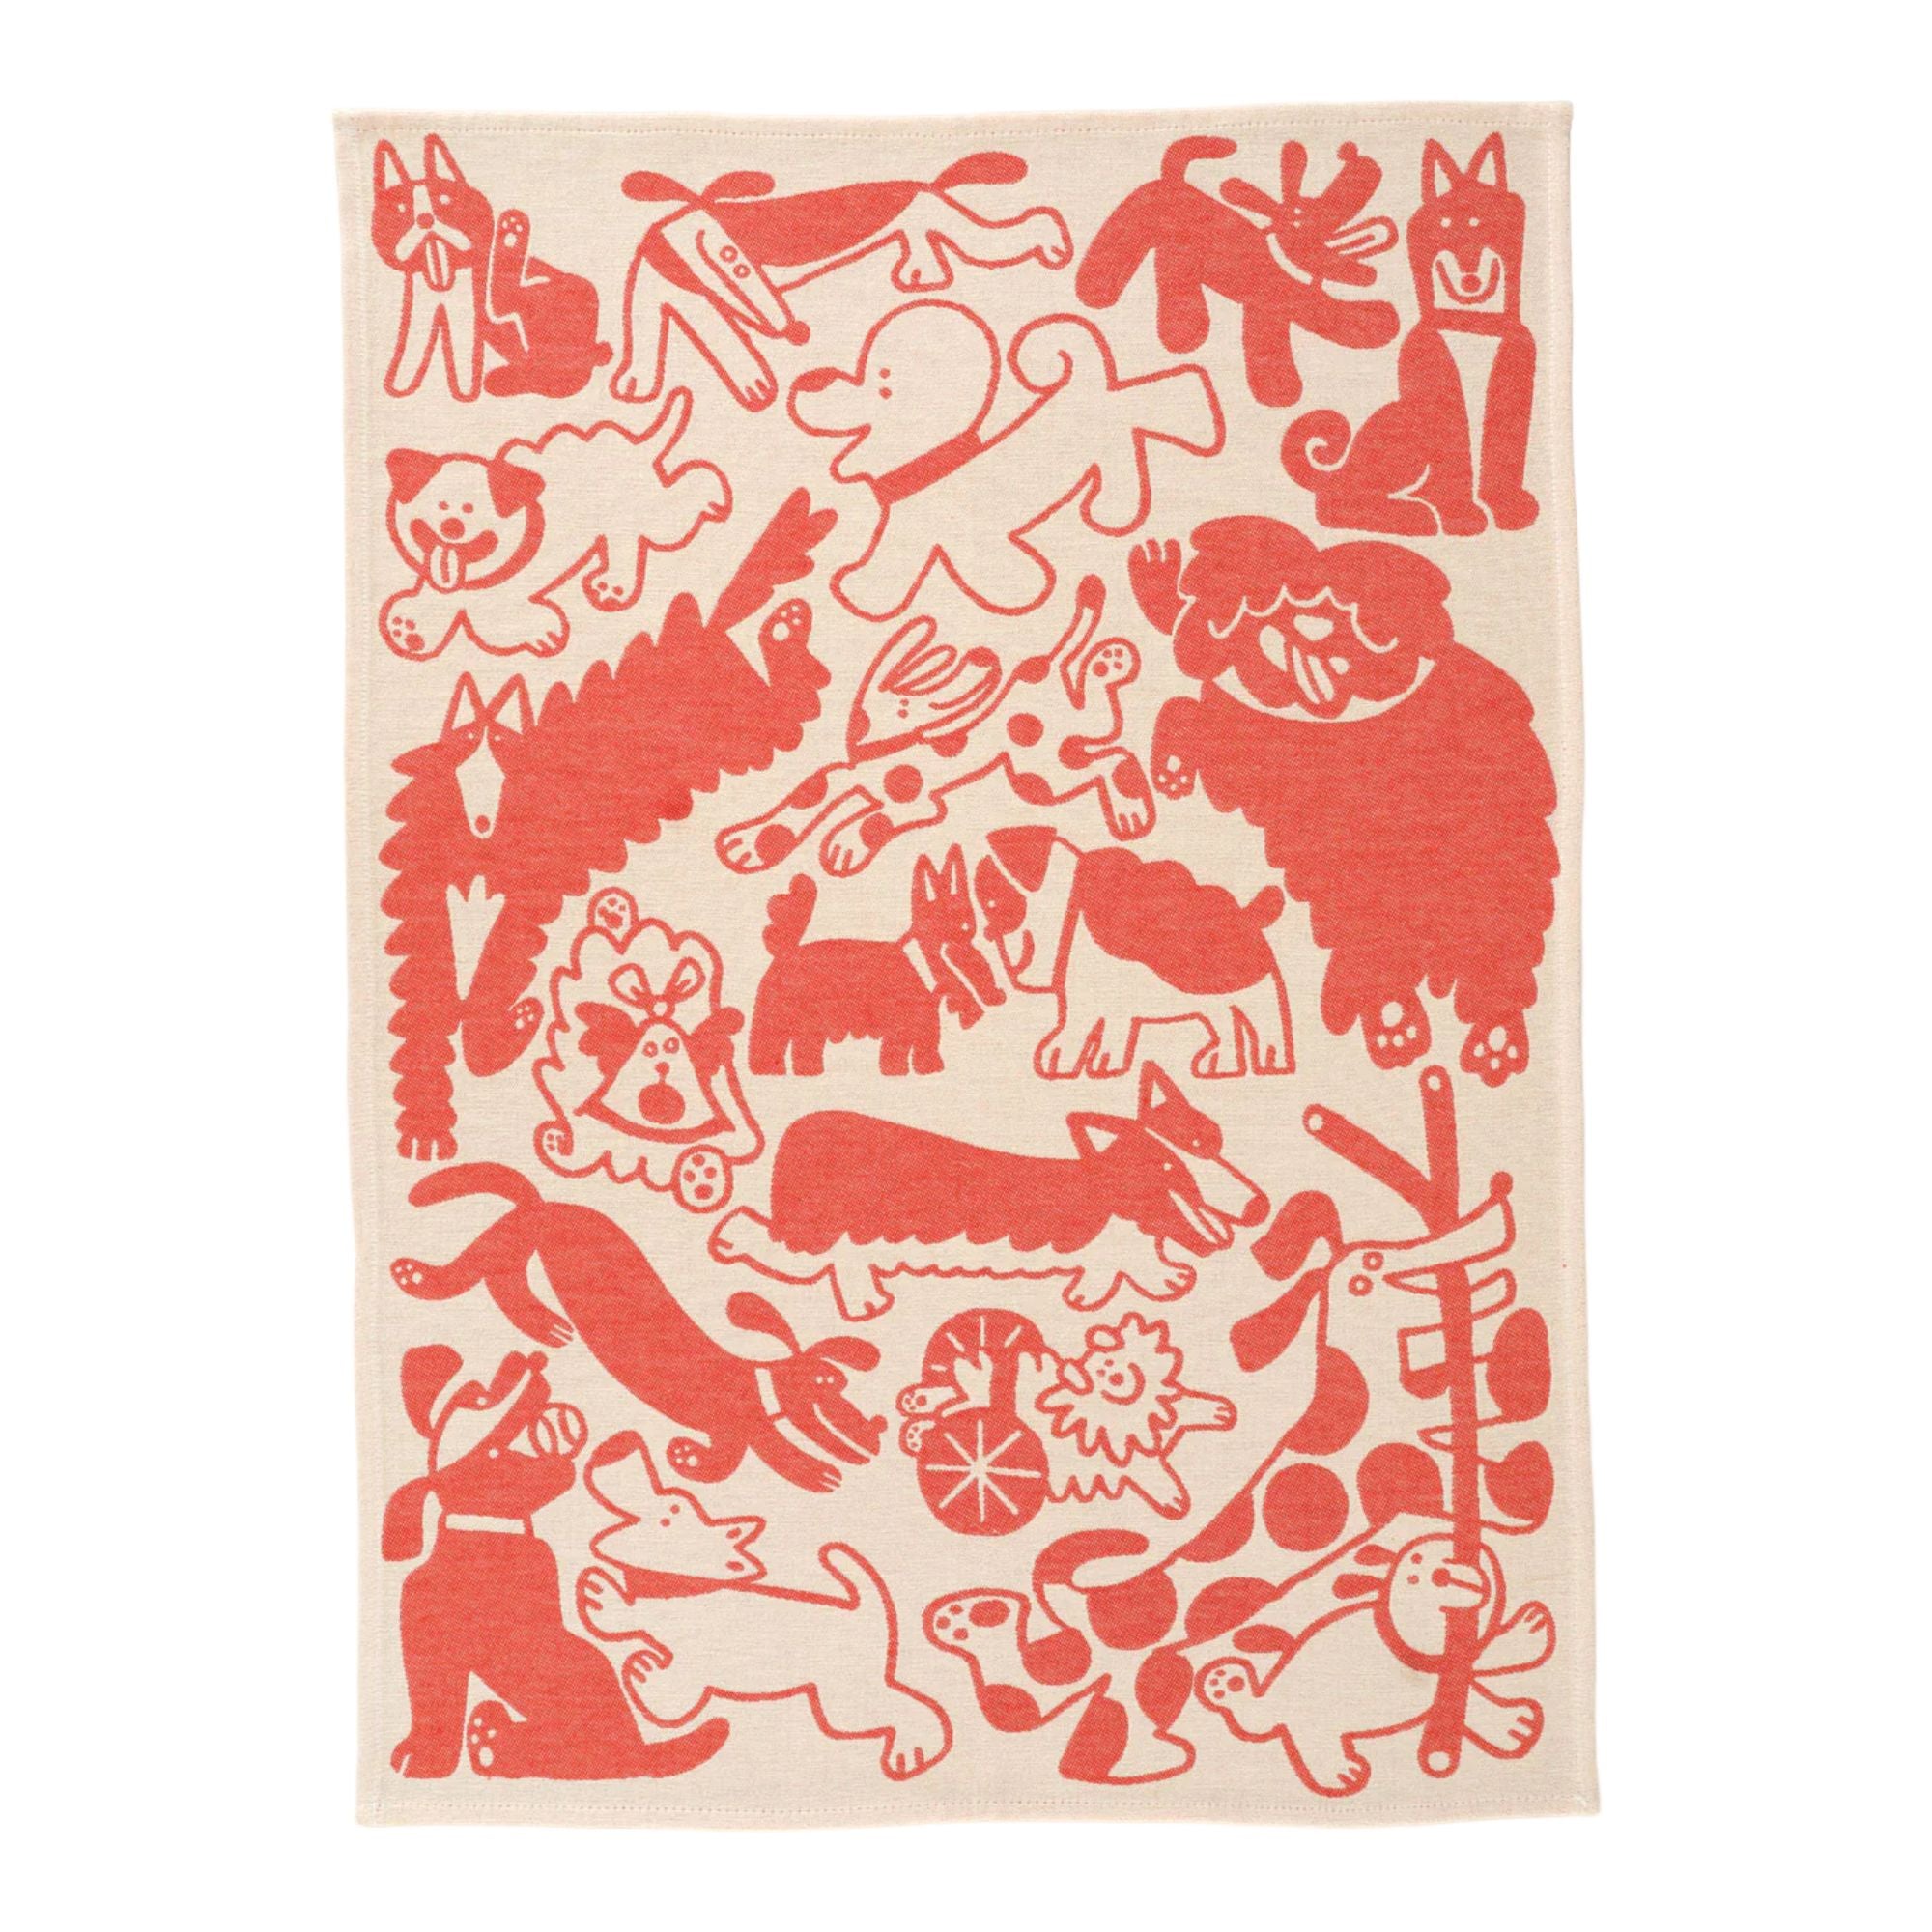 DOGS DAY OUT TEA TOWEL